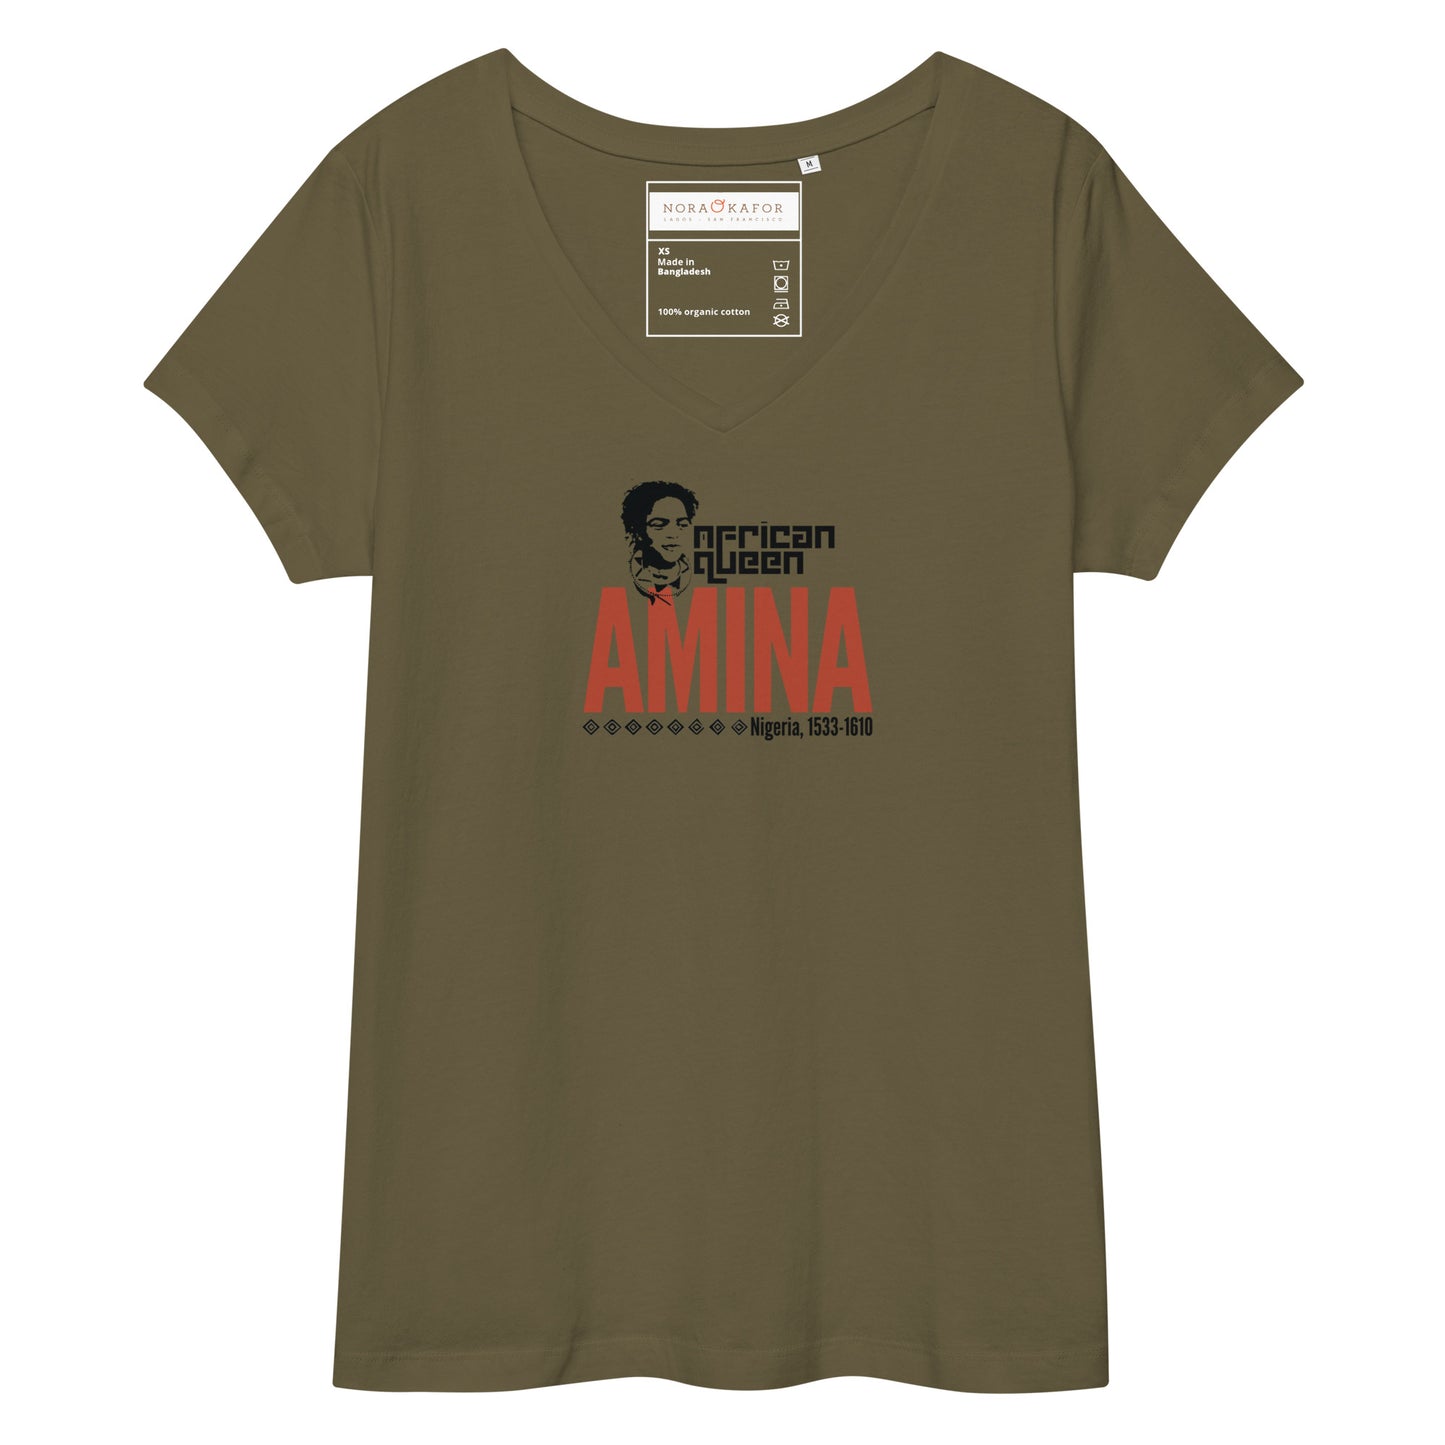 Queen Amina Women’s fitted v-neck t-shirt